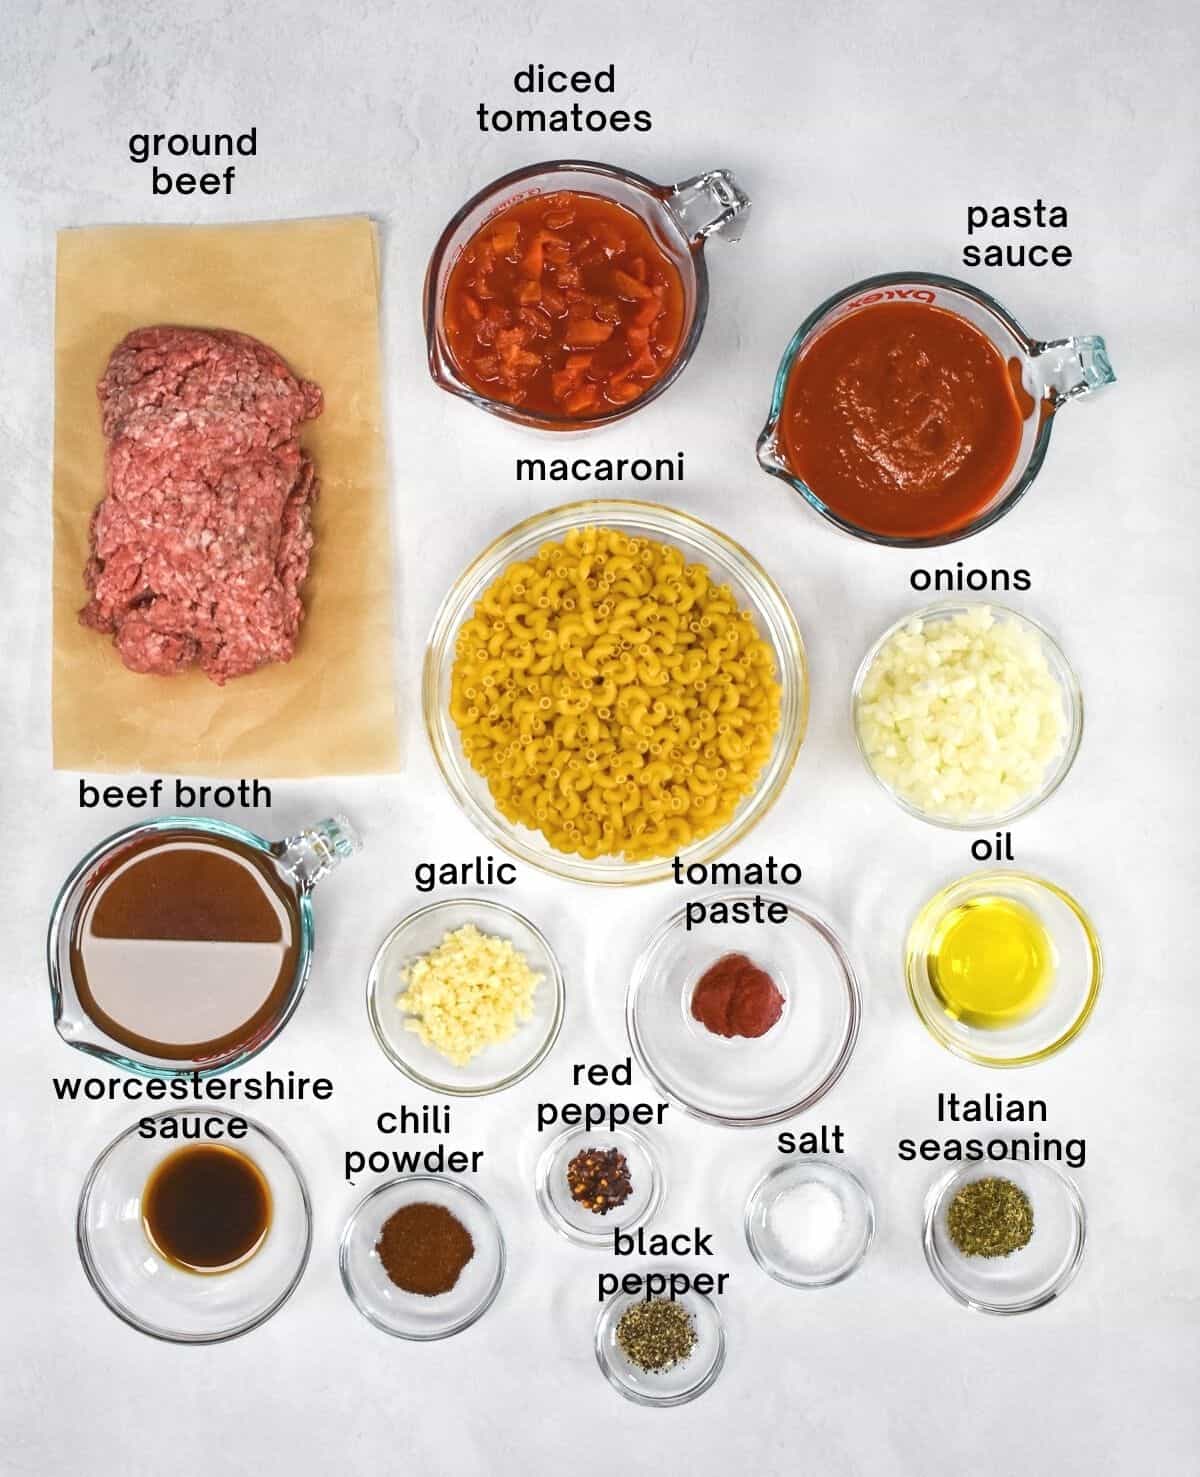 The ingredients for the beefaroni, arranged on a white table with the ingredient name above each in black letters.